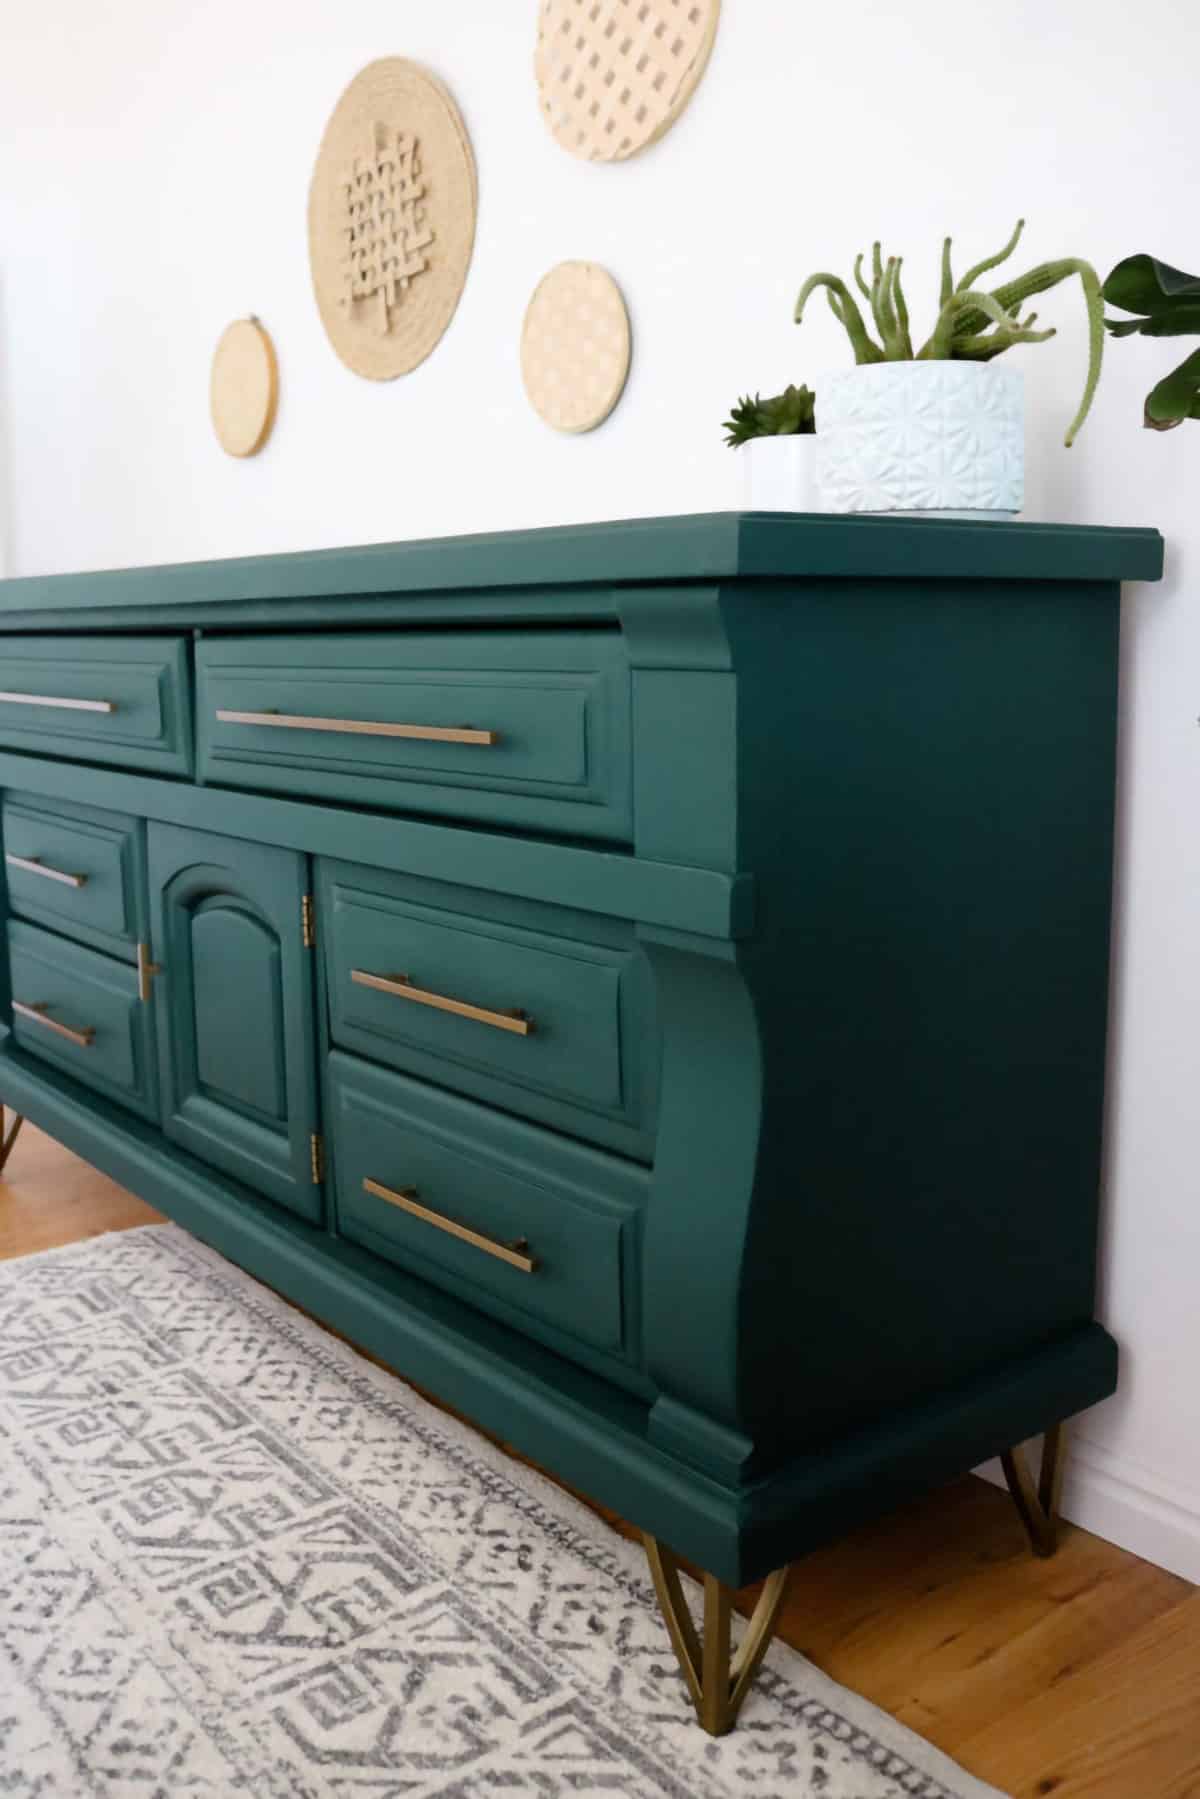 Hunter green dresser with brass hardware on gray and white patterned rug in bohemian style.